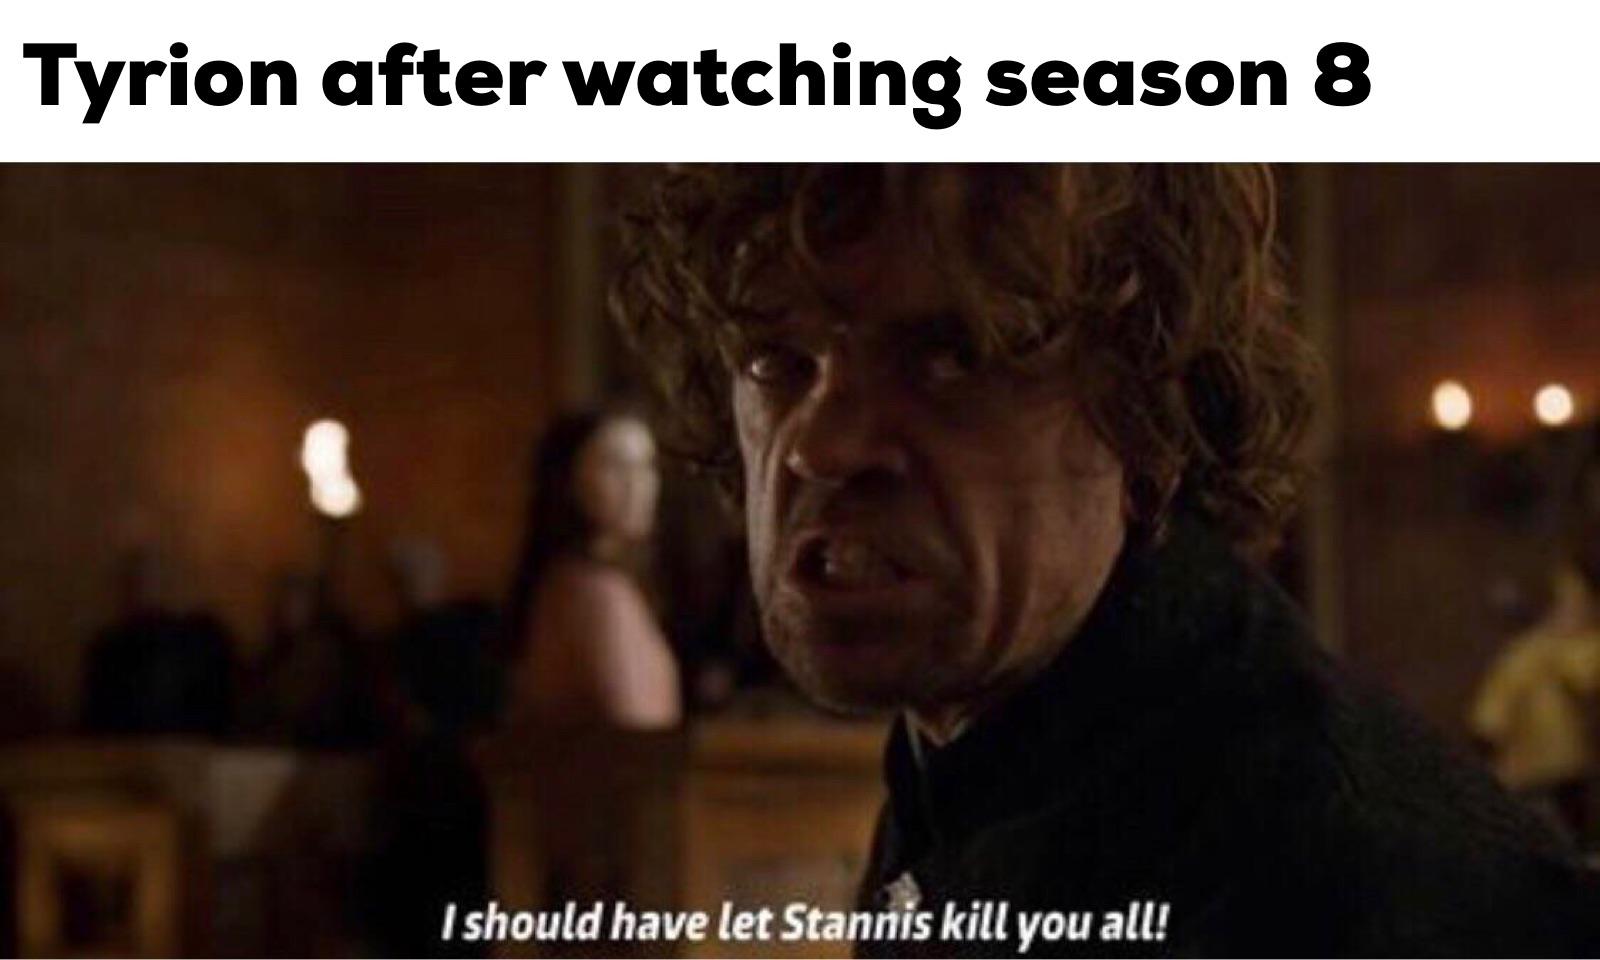 Jaime-lannister, Stannis, Season Game of thrones memes Jaime-lannister, Stannis, Season text: Tyrion after watching season 8 I should have let Stanms kill you all! 